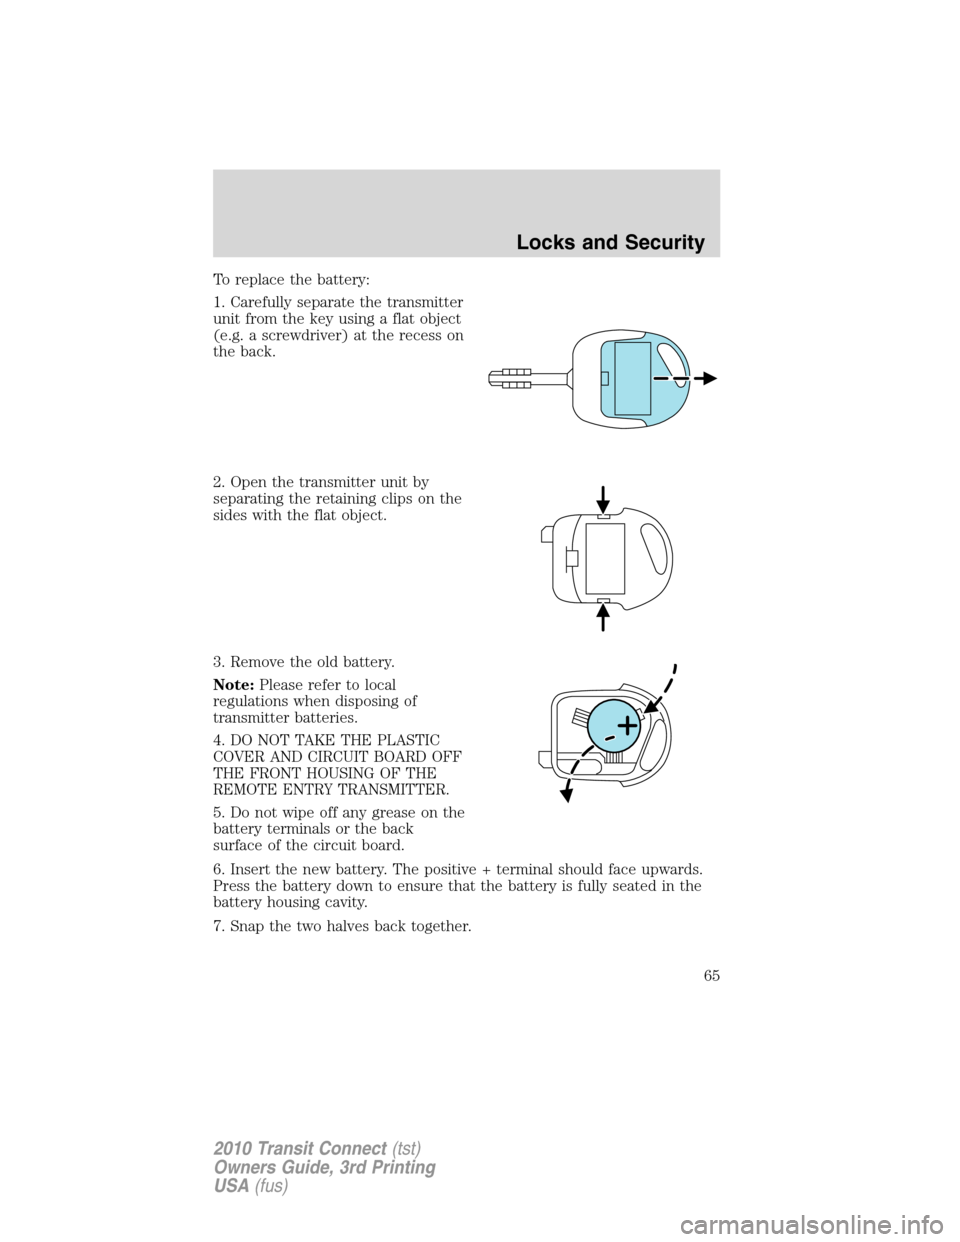 FORD TRANSIT CONNECT 2010 1.G Owners Manual To replace the battery:
1. Carefully separate the transmitter
unit from the key using a flat object
(e.g. a screwdriver) at the recess on
the back.
2. Open the transmitter unit by
separating the retai